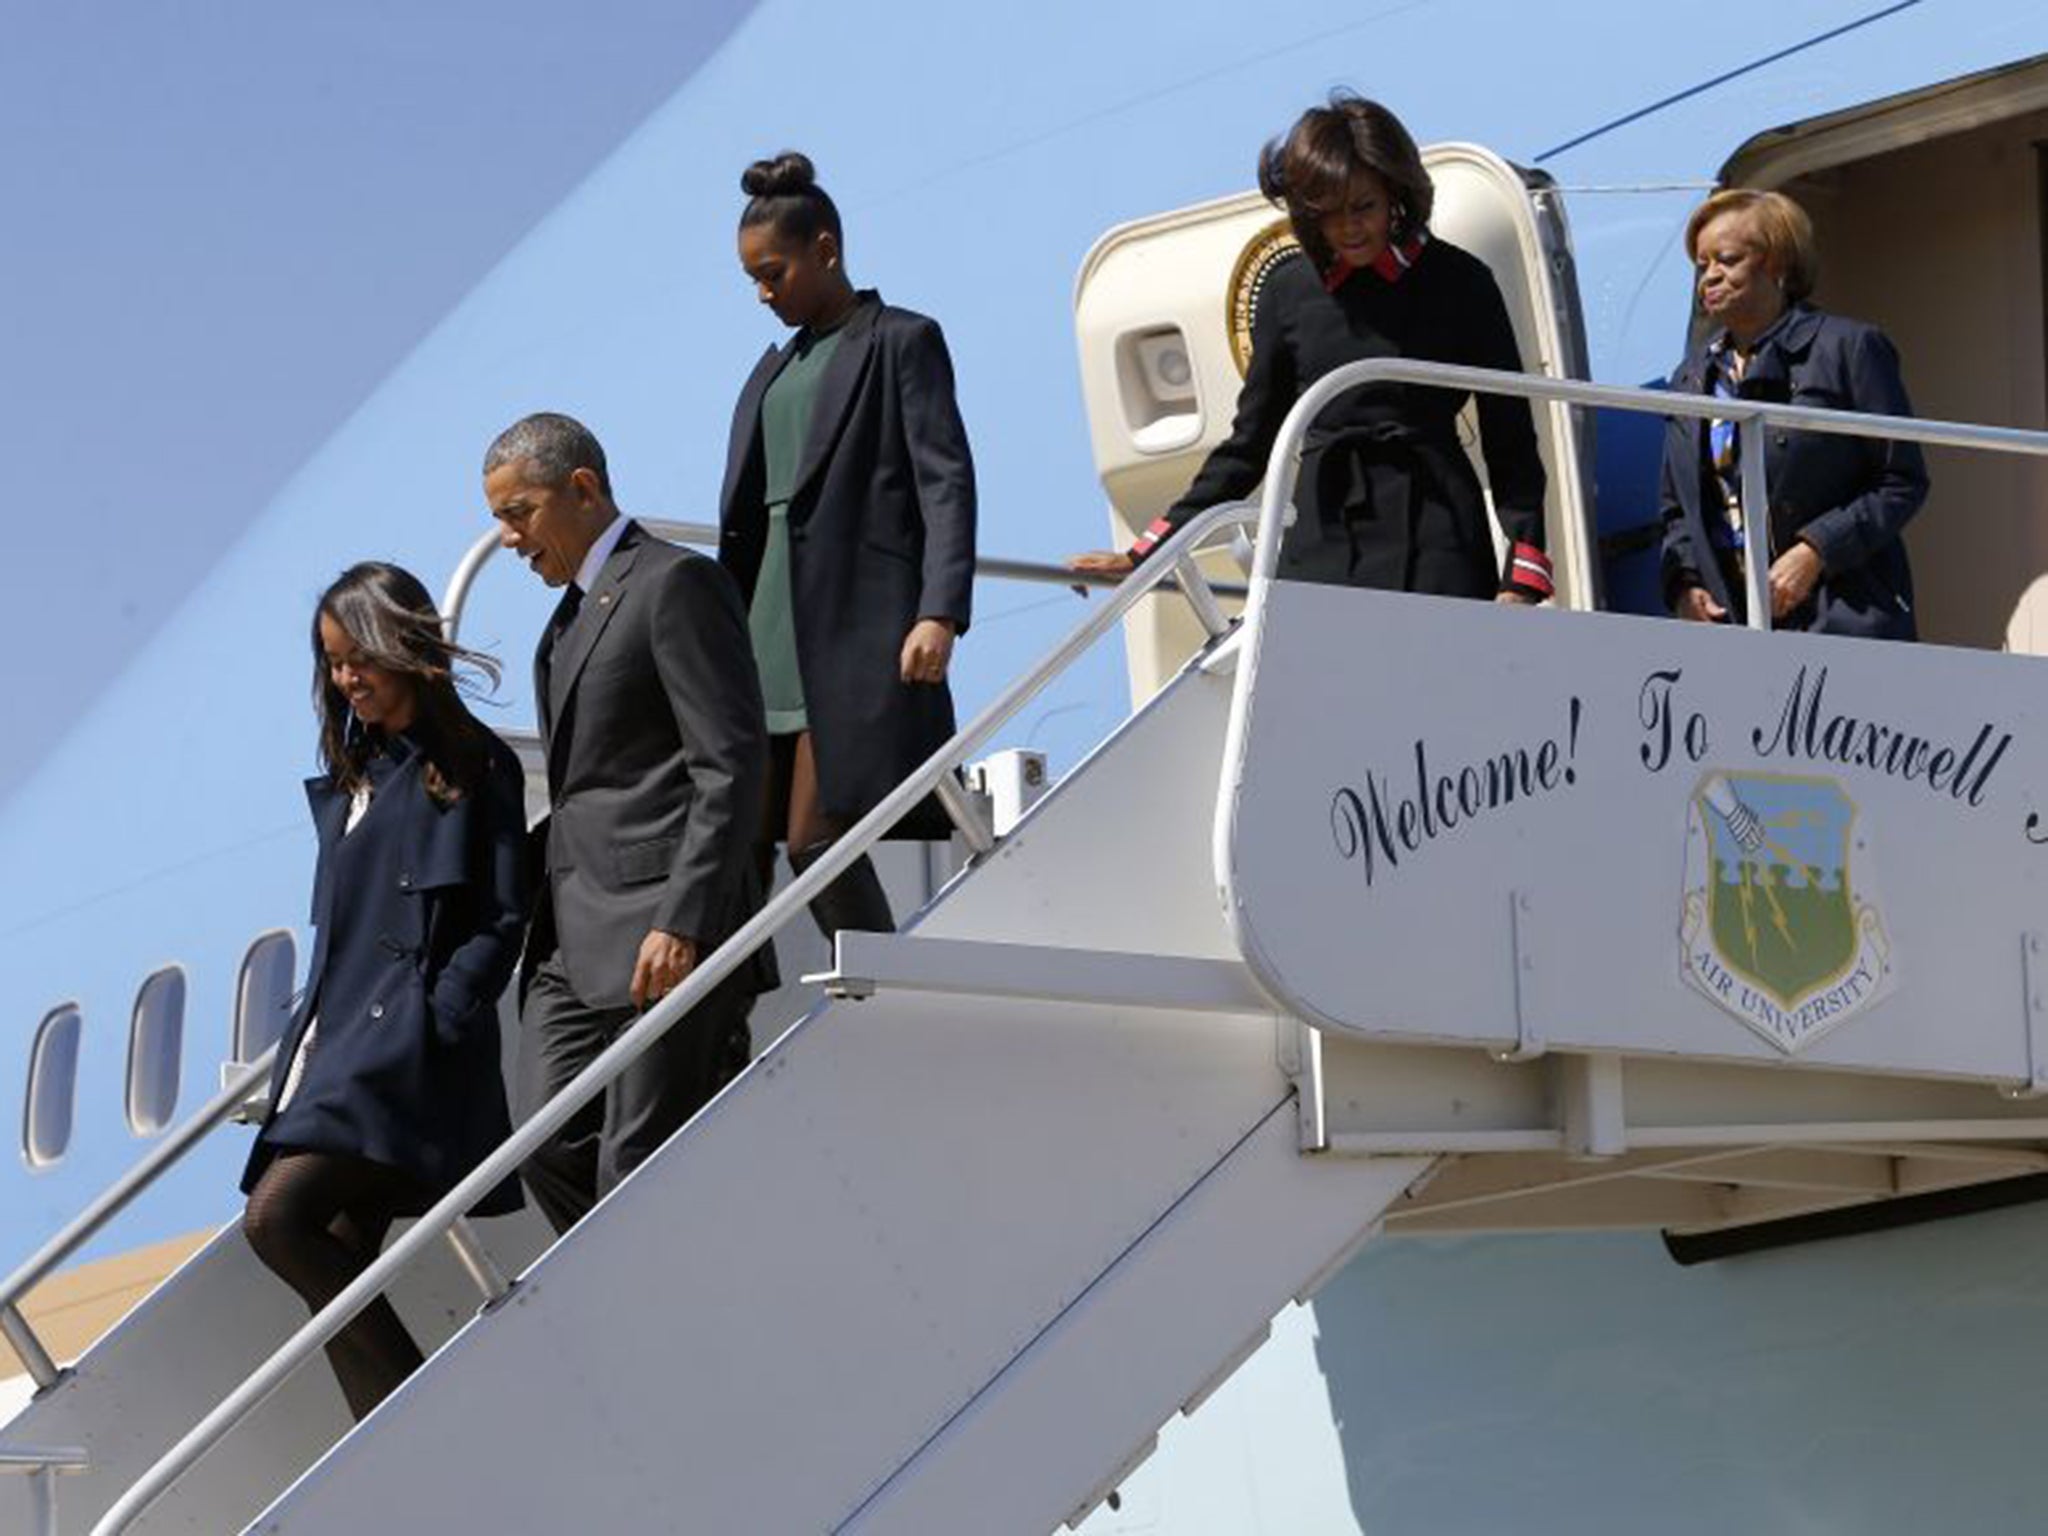 Barack Obama and his daughters arriving in Alabama on Saturday